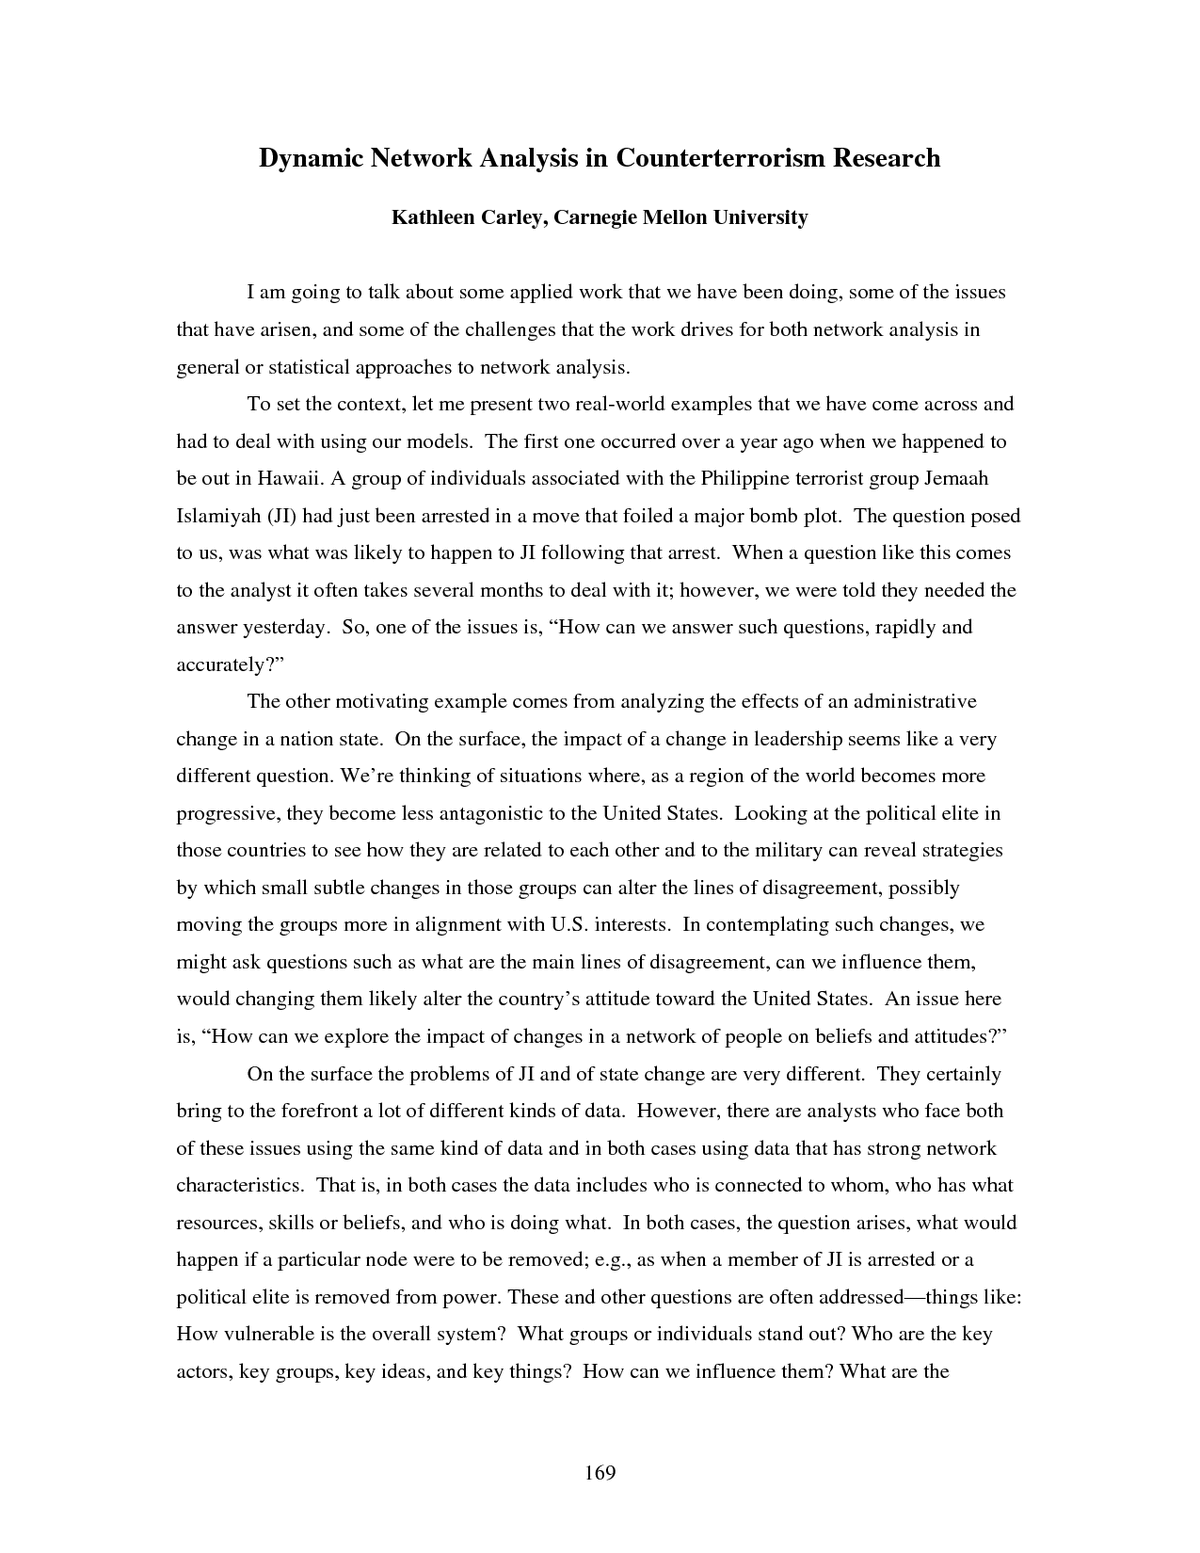 Kleinfeld 1999 research paper